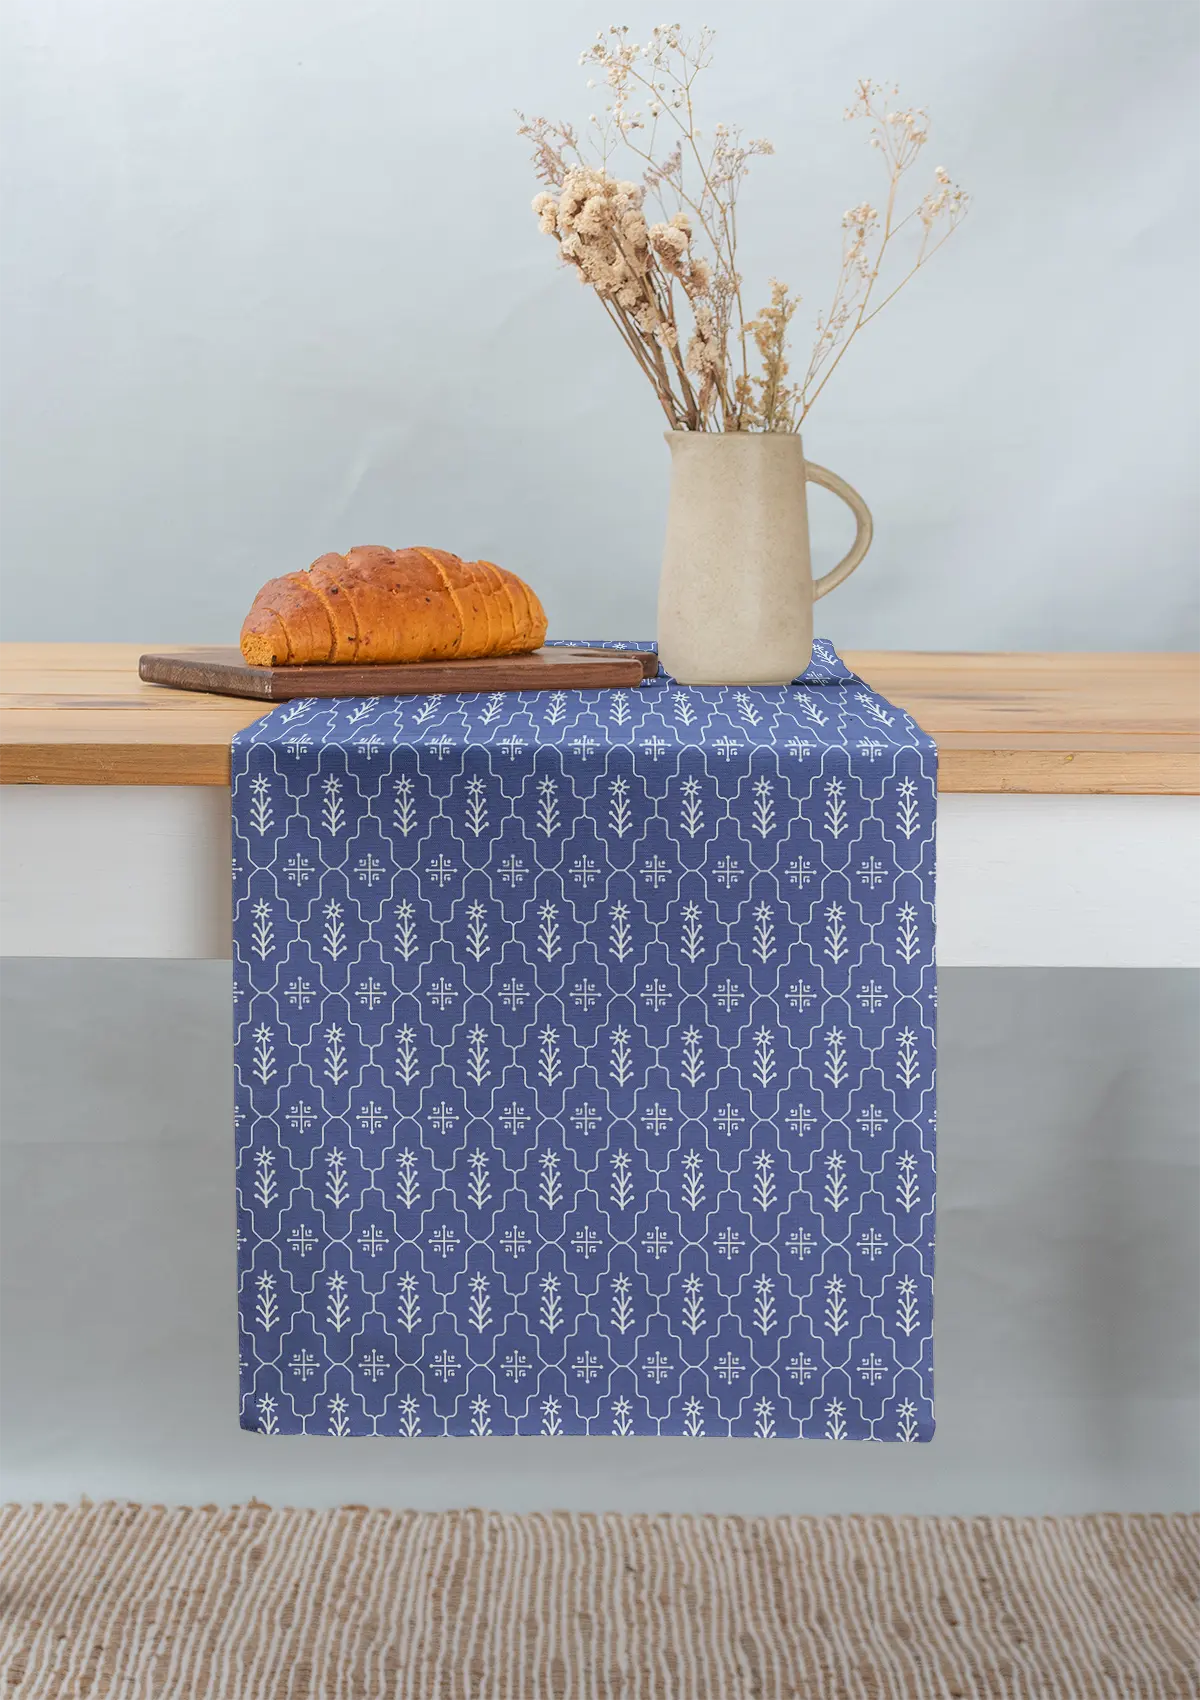 Meadows 100% cotton geomtric table runner for 4 seater or 6 seater dining - Indigo